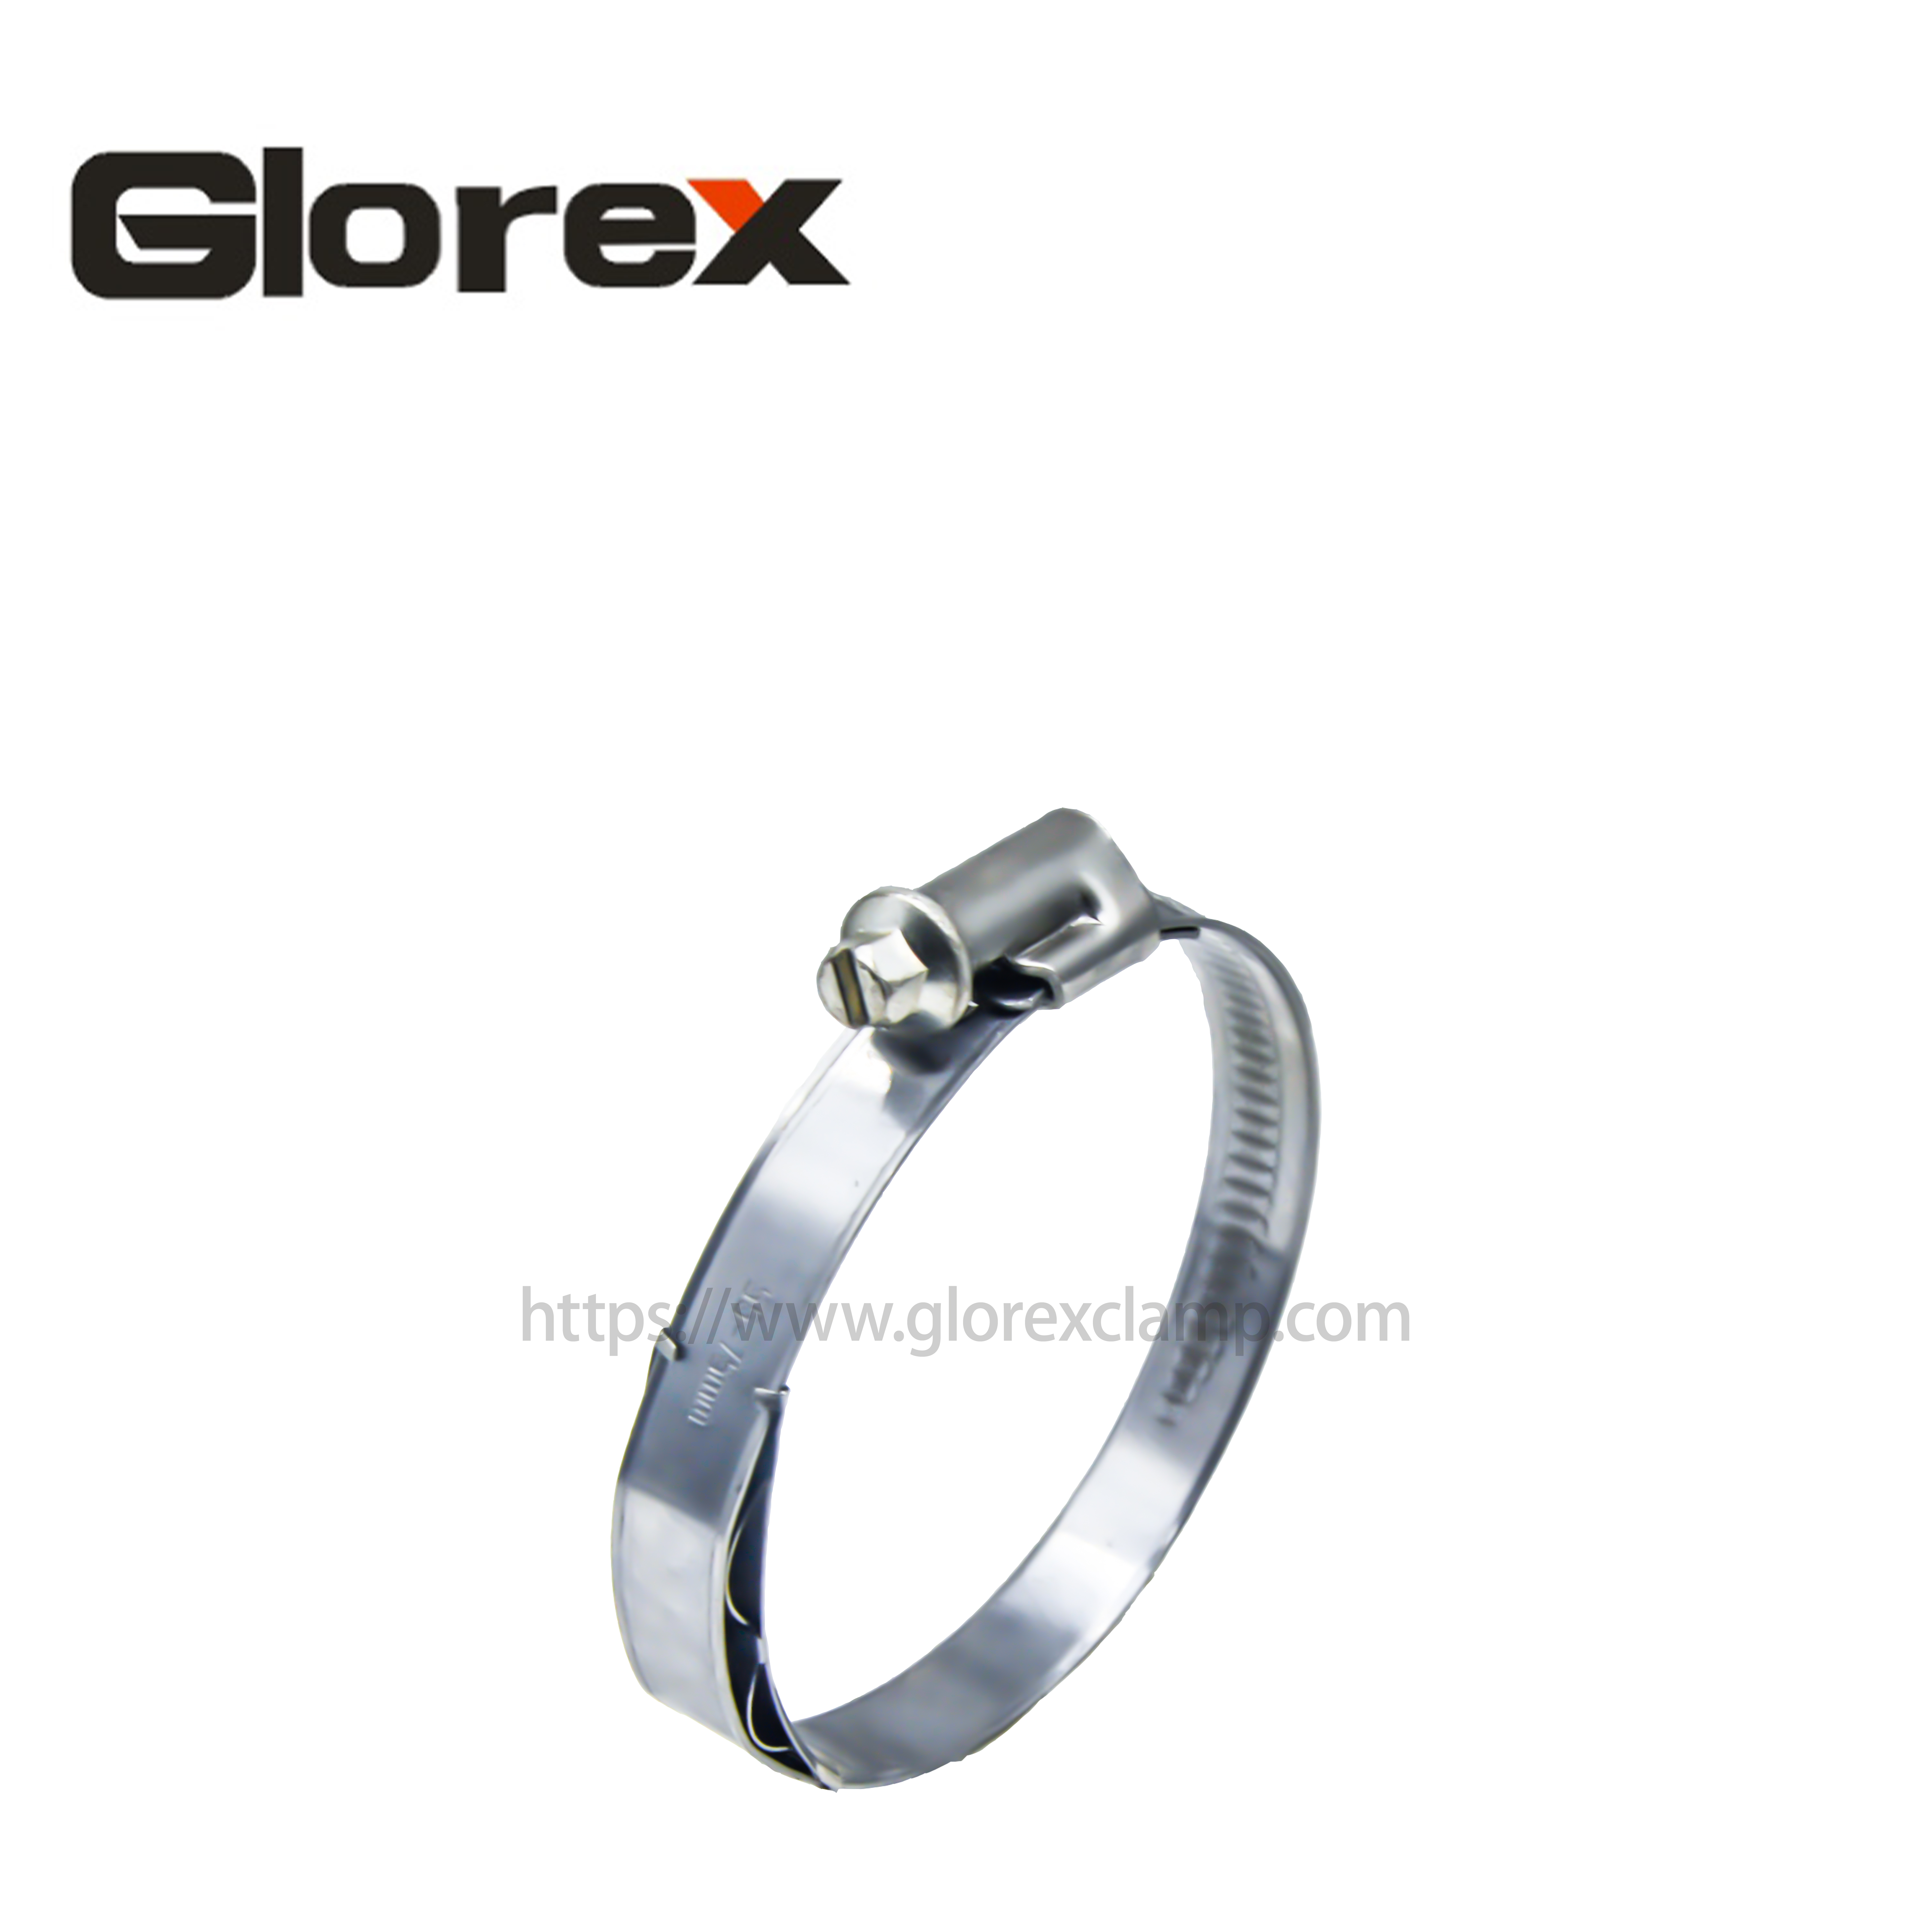 PriceList for Constant Torque Hose Clamp - German type hose clamp without welding(with a spring) – Glorex